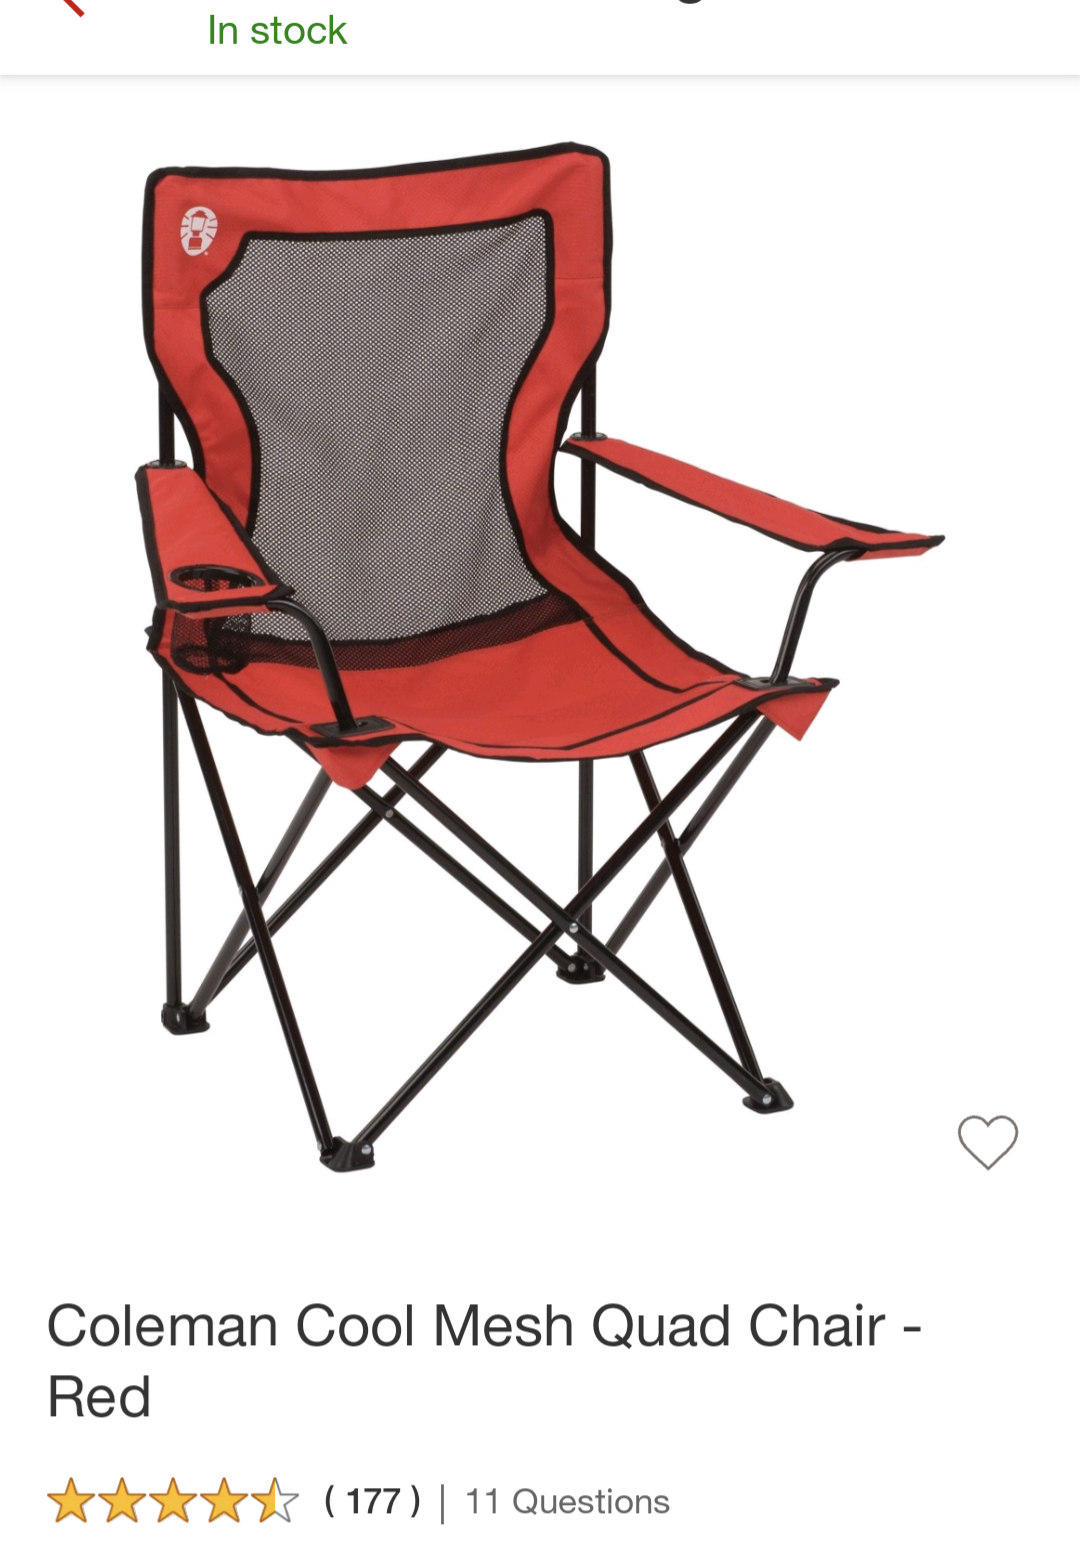 Coleman Cool Mesh Quad Chair - Red (70% in store) $8.99 YMMV